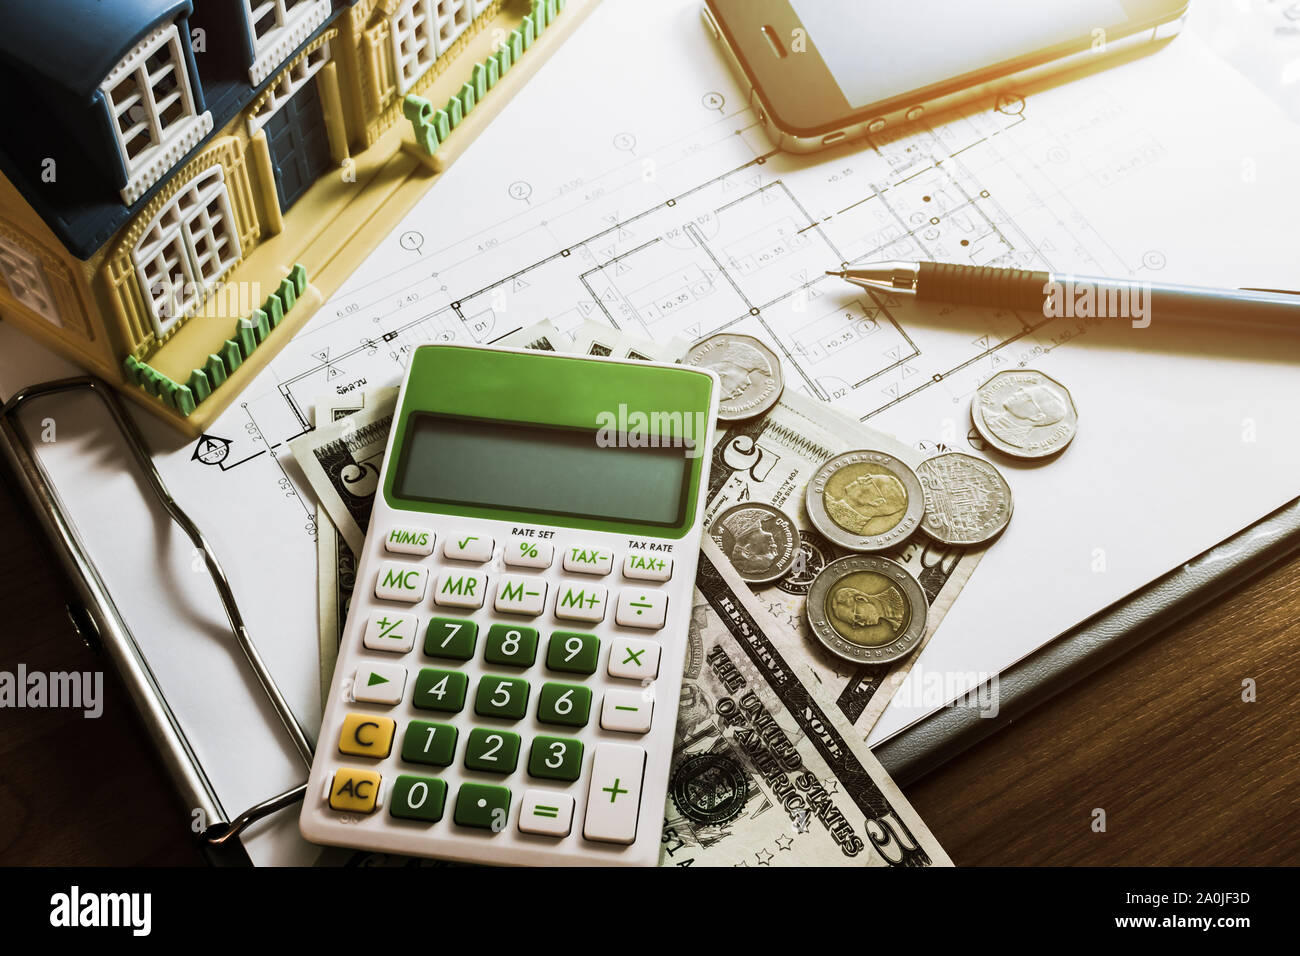 Investment for construction with limit budget, Construction plan, pen, money, model house, smart phone  and calculator on wooden table under light Stock Photo